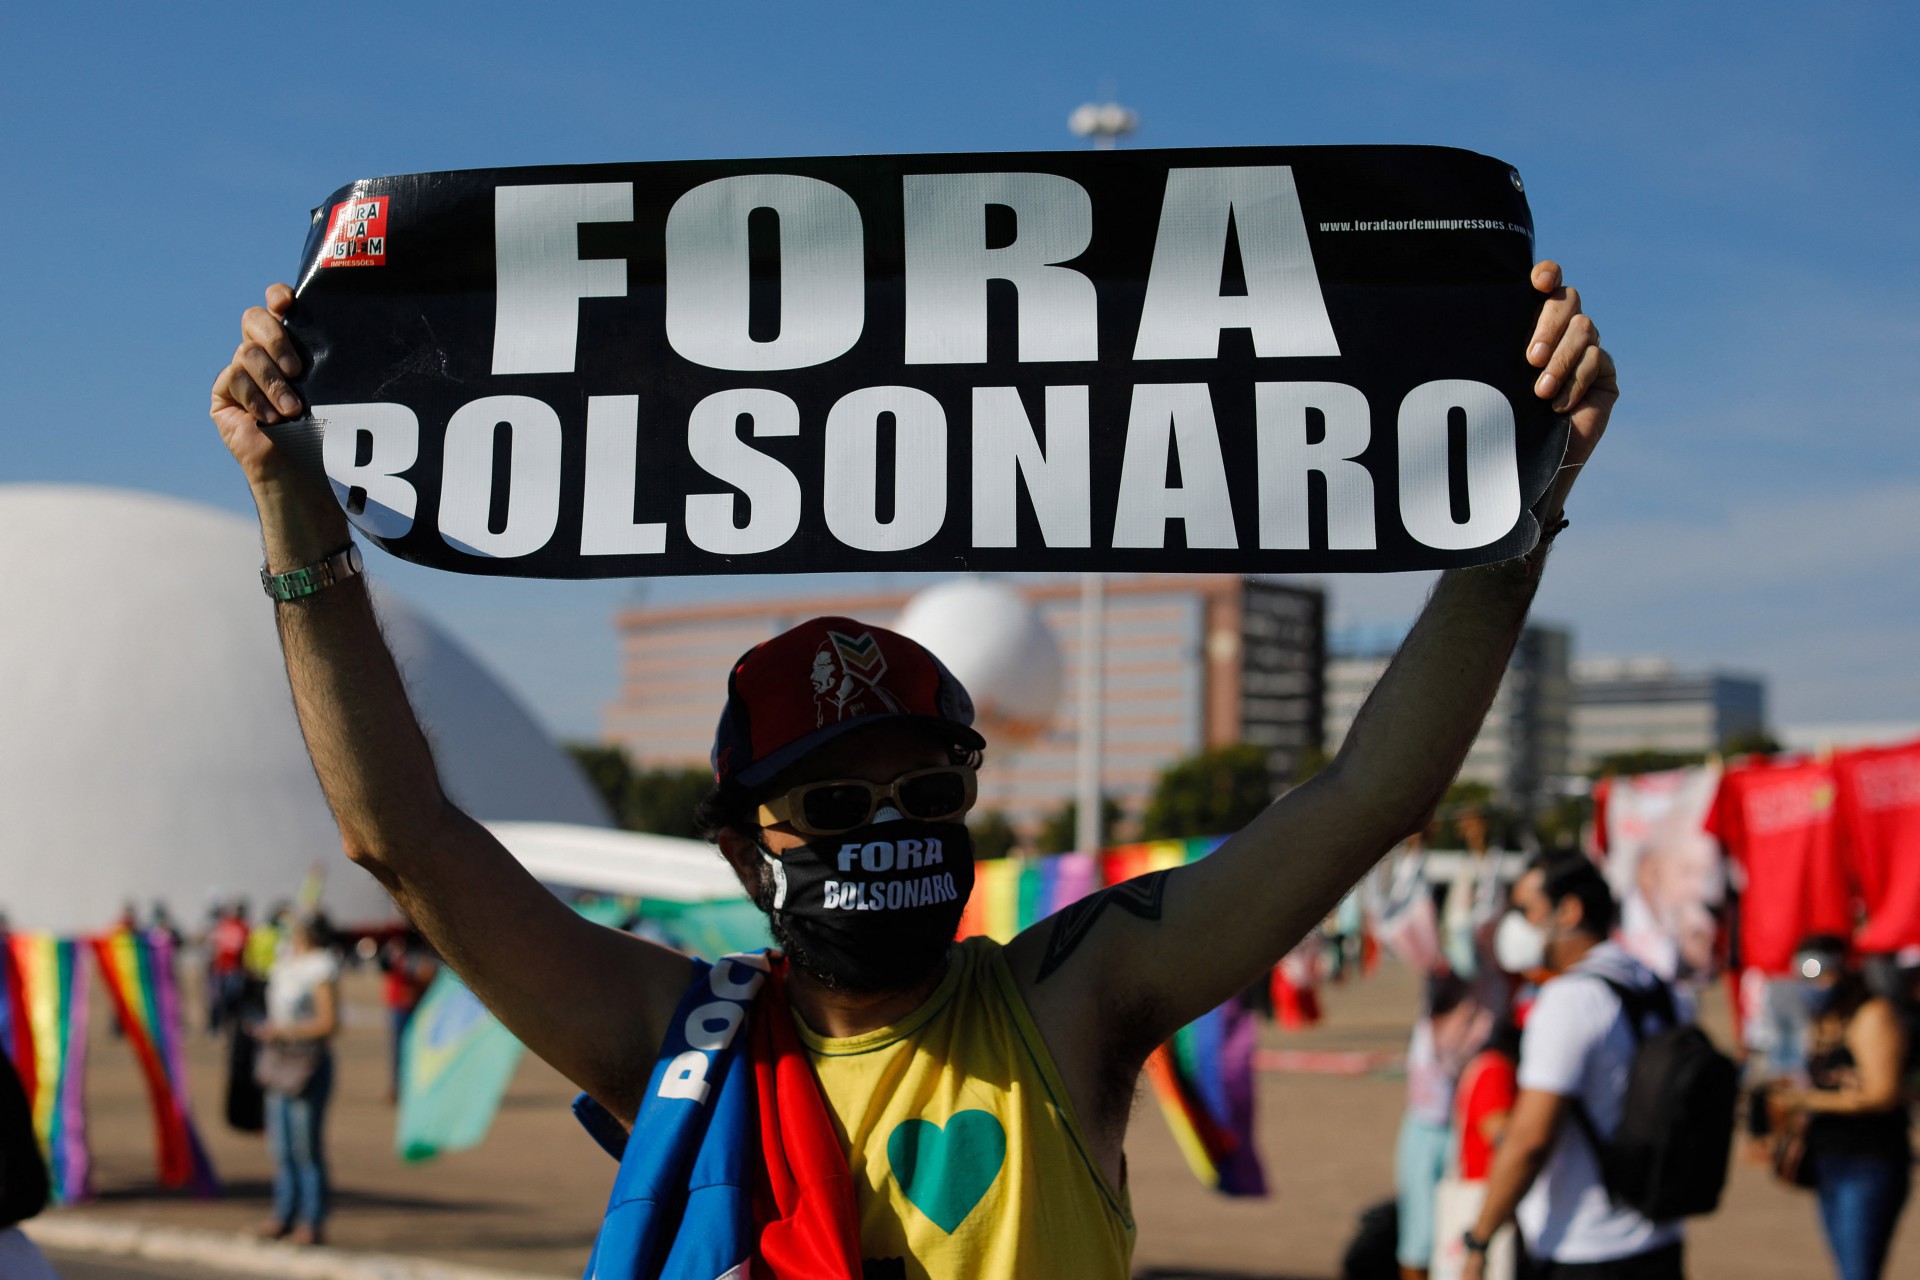 An activist holds a sign during a protest by opposition parties and social movements against Brazilian President Jair Bolsonaro's handling of the COVID-19 pandemic in Brasilia, on June 19, 2021. - Far-right President Jair Bolsonaro has been facing criticism for his management of the pandemic, including initially refusing offers of vaccines, as epidemiologists warn Brazil may now be on the brink of a third wave of Covid-19. (Photo by Sergio Lima / AFP)       Caption